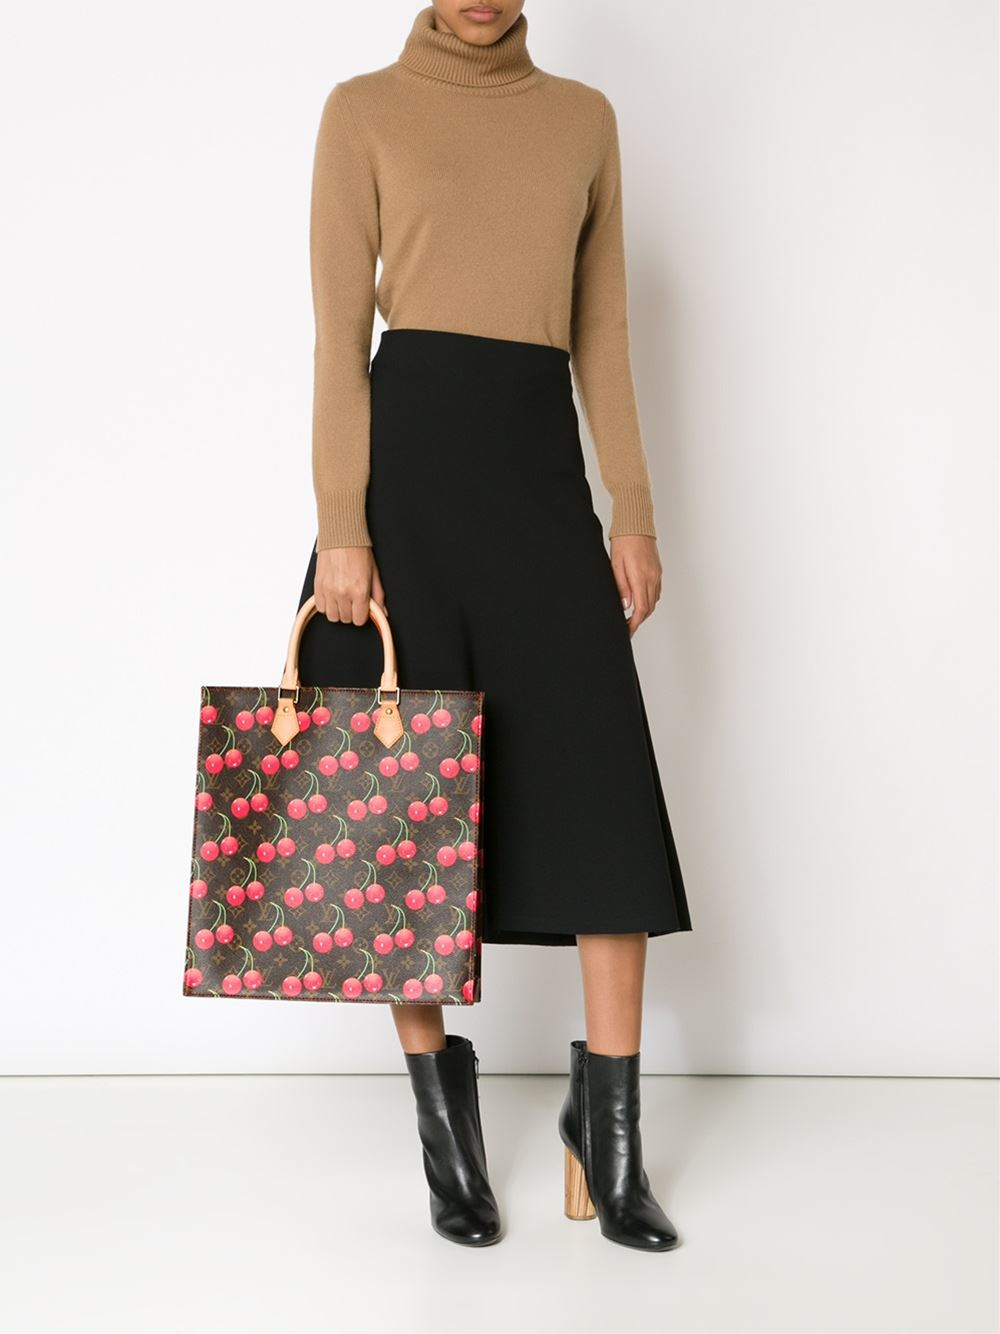 Louis Vuitton Cherry Print Tote in Brown - Lyst